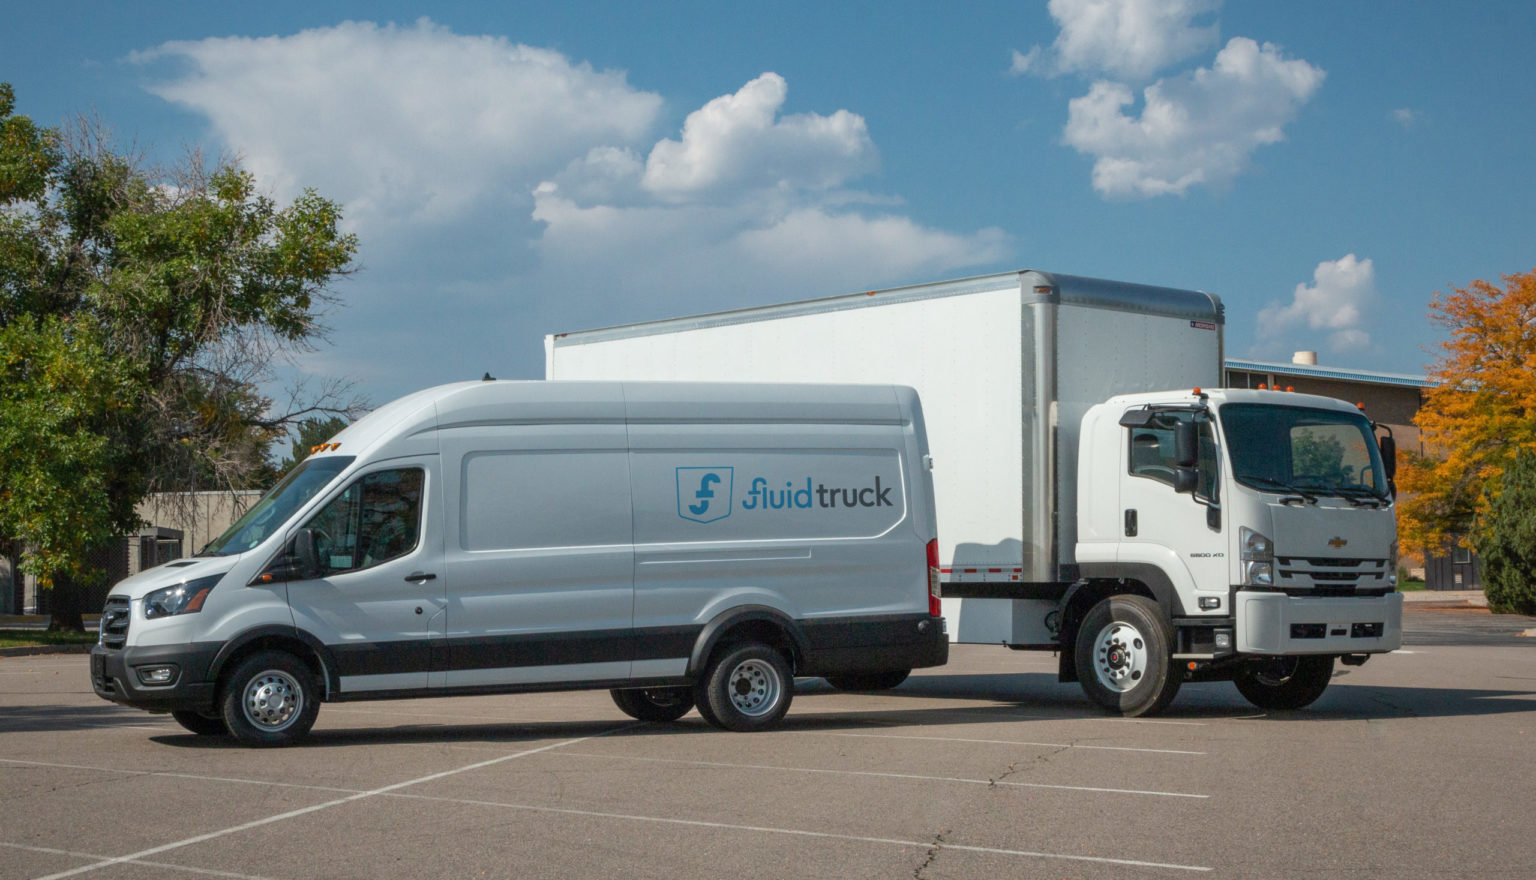 Fluid Truck closes 63M funding round, plans to hire up to 275 by end